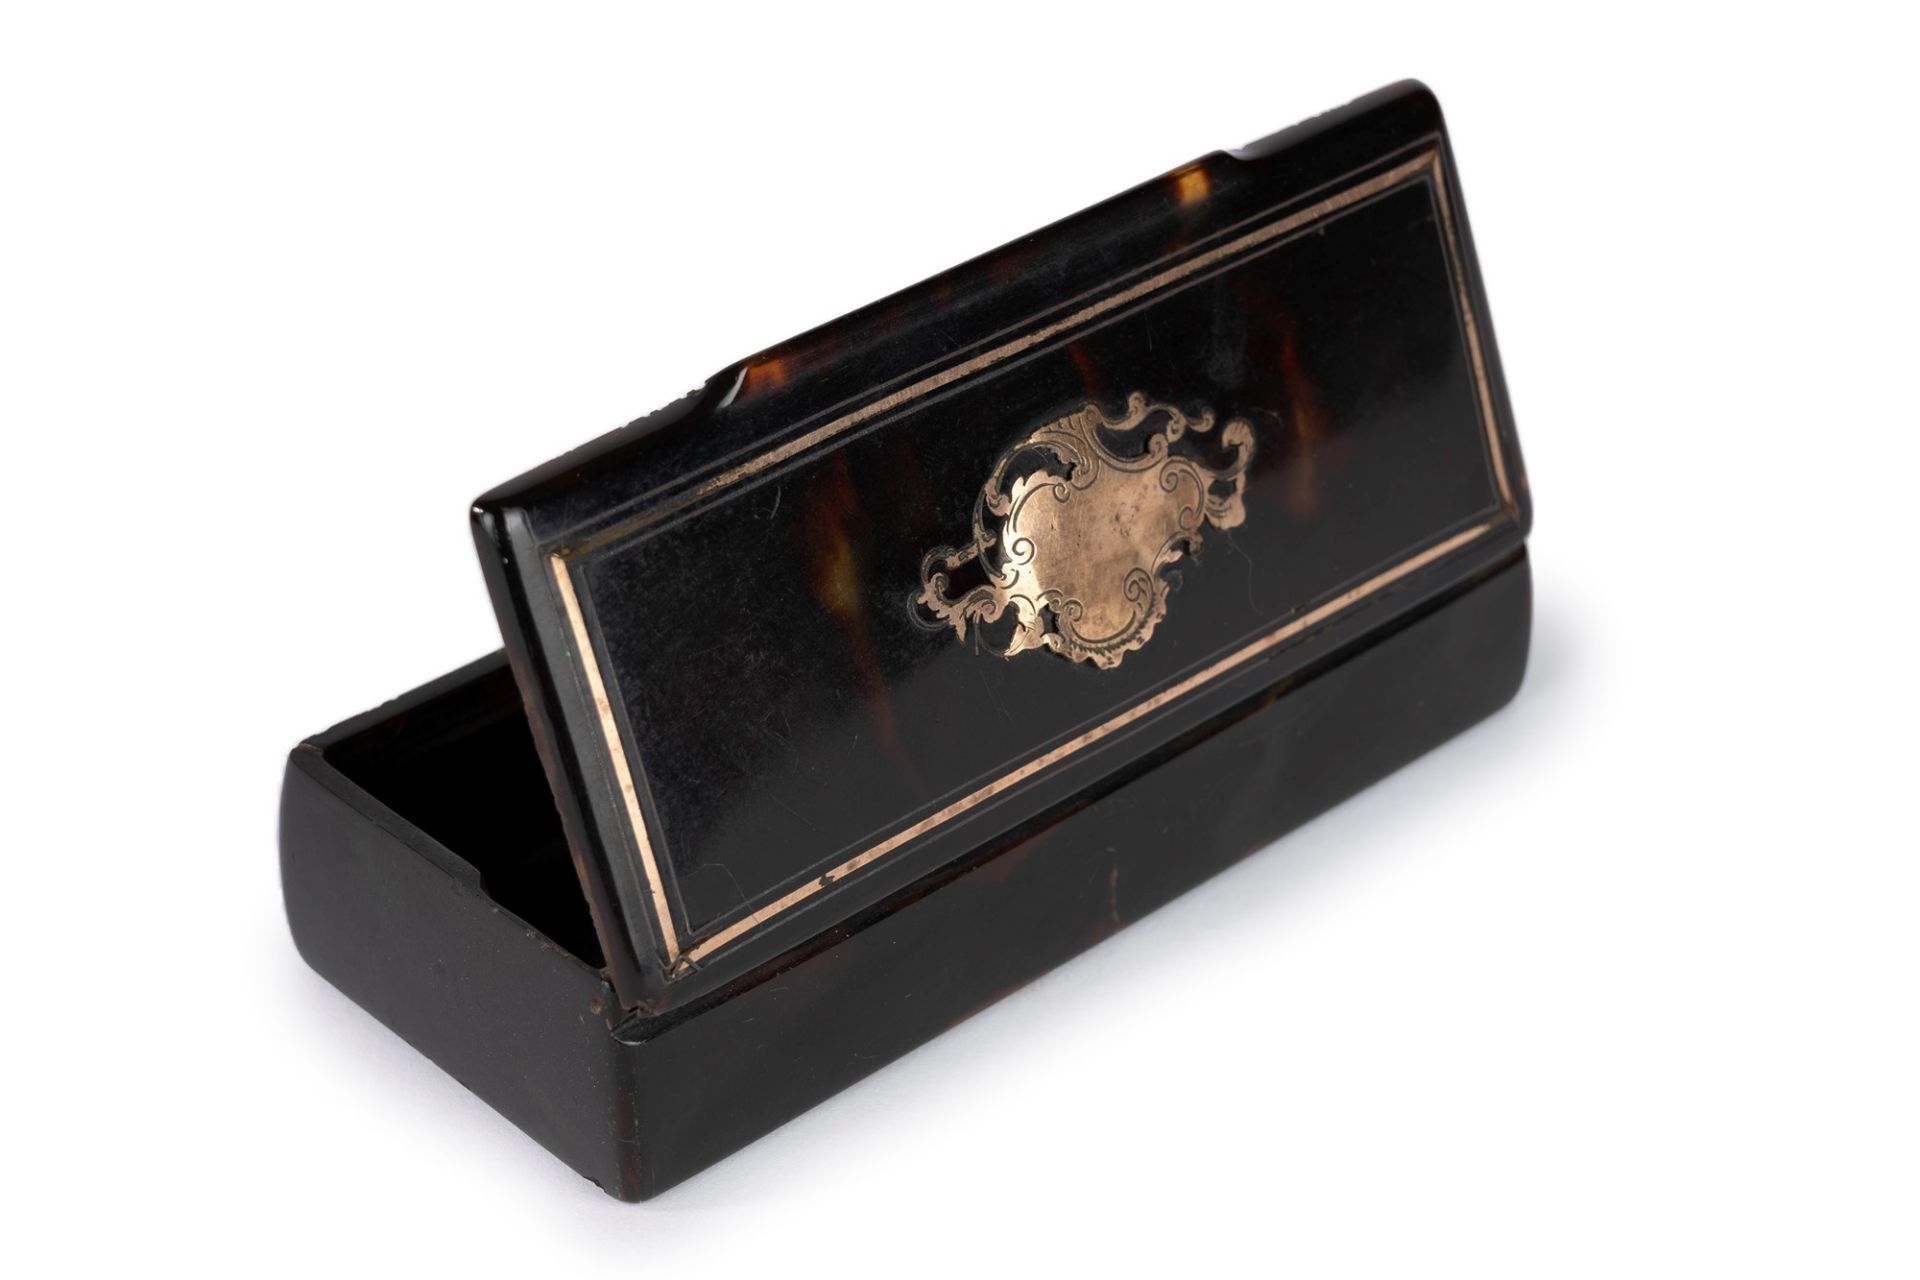 Lot made of a small wooden and mother-of-pearl box and another black one, 19th century - Image 4 of 8